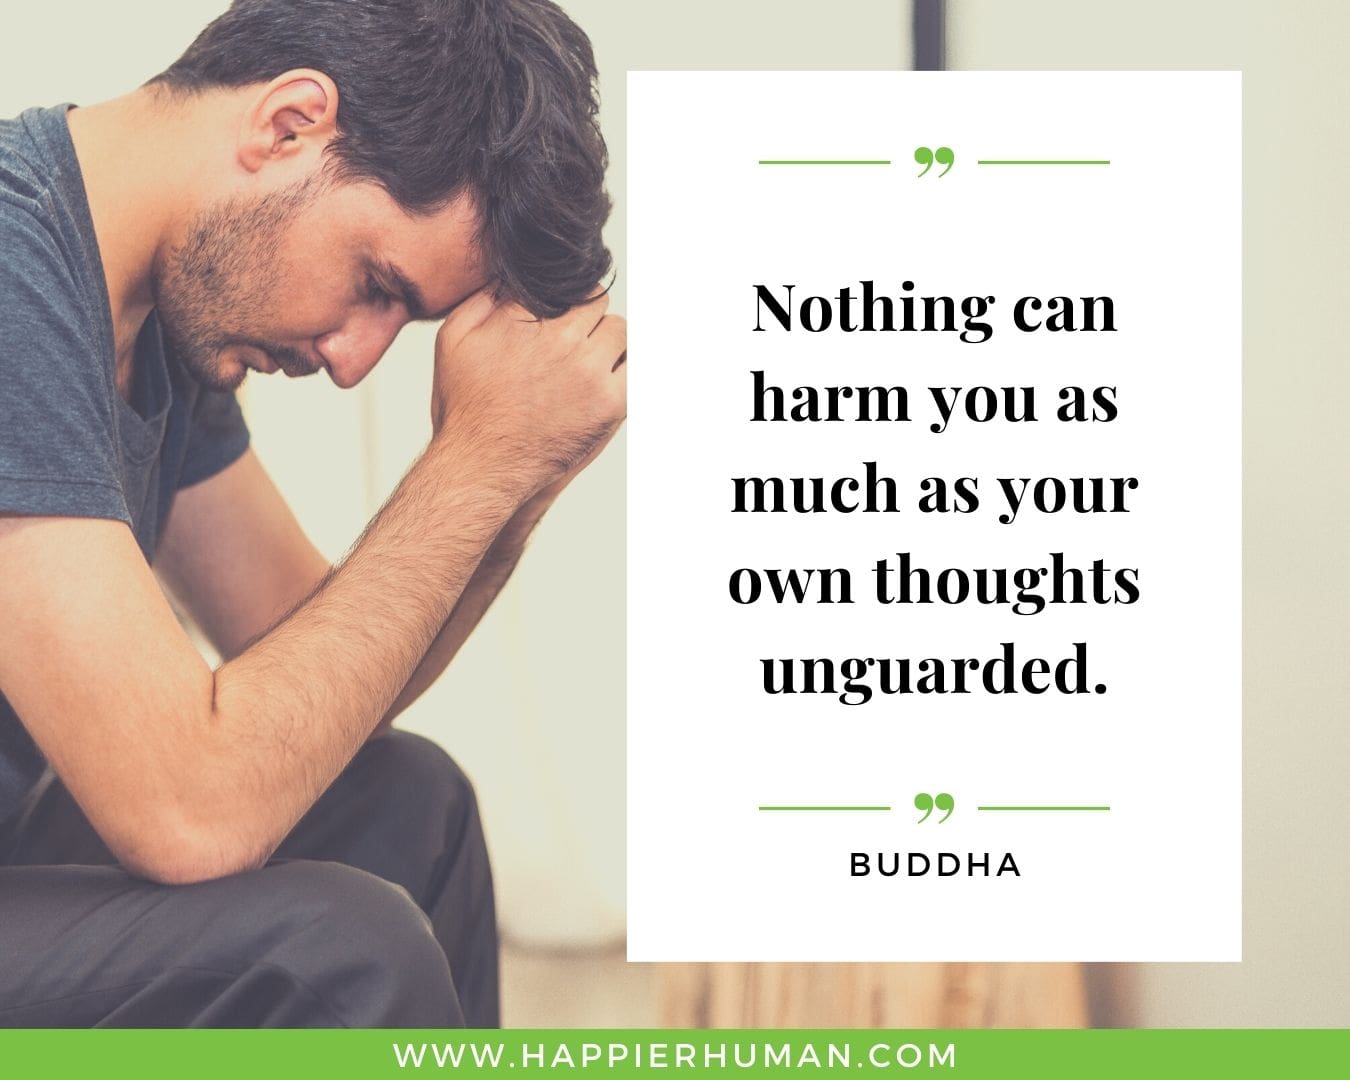 Overthinking Quotes - “Nothing can harm you as much as your own thoughts unguarded.” – Buddha